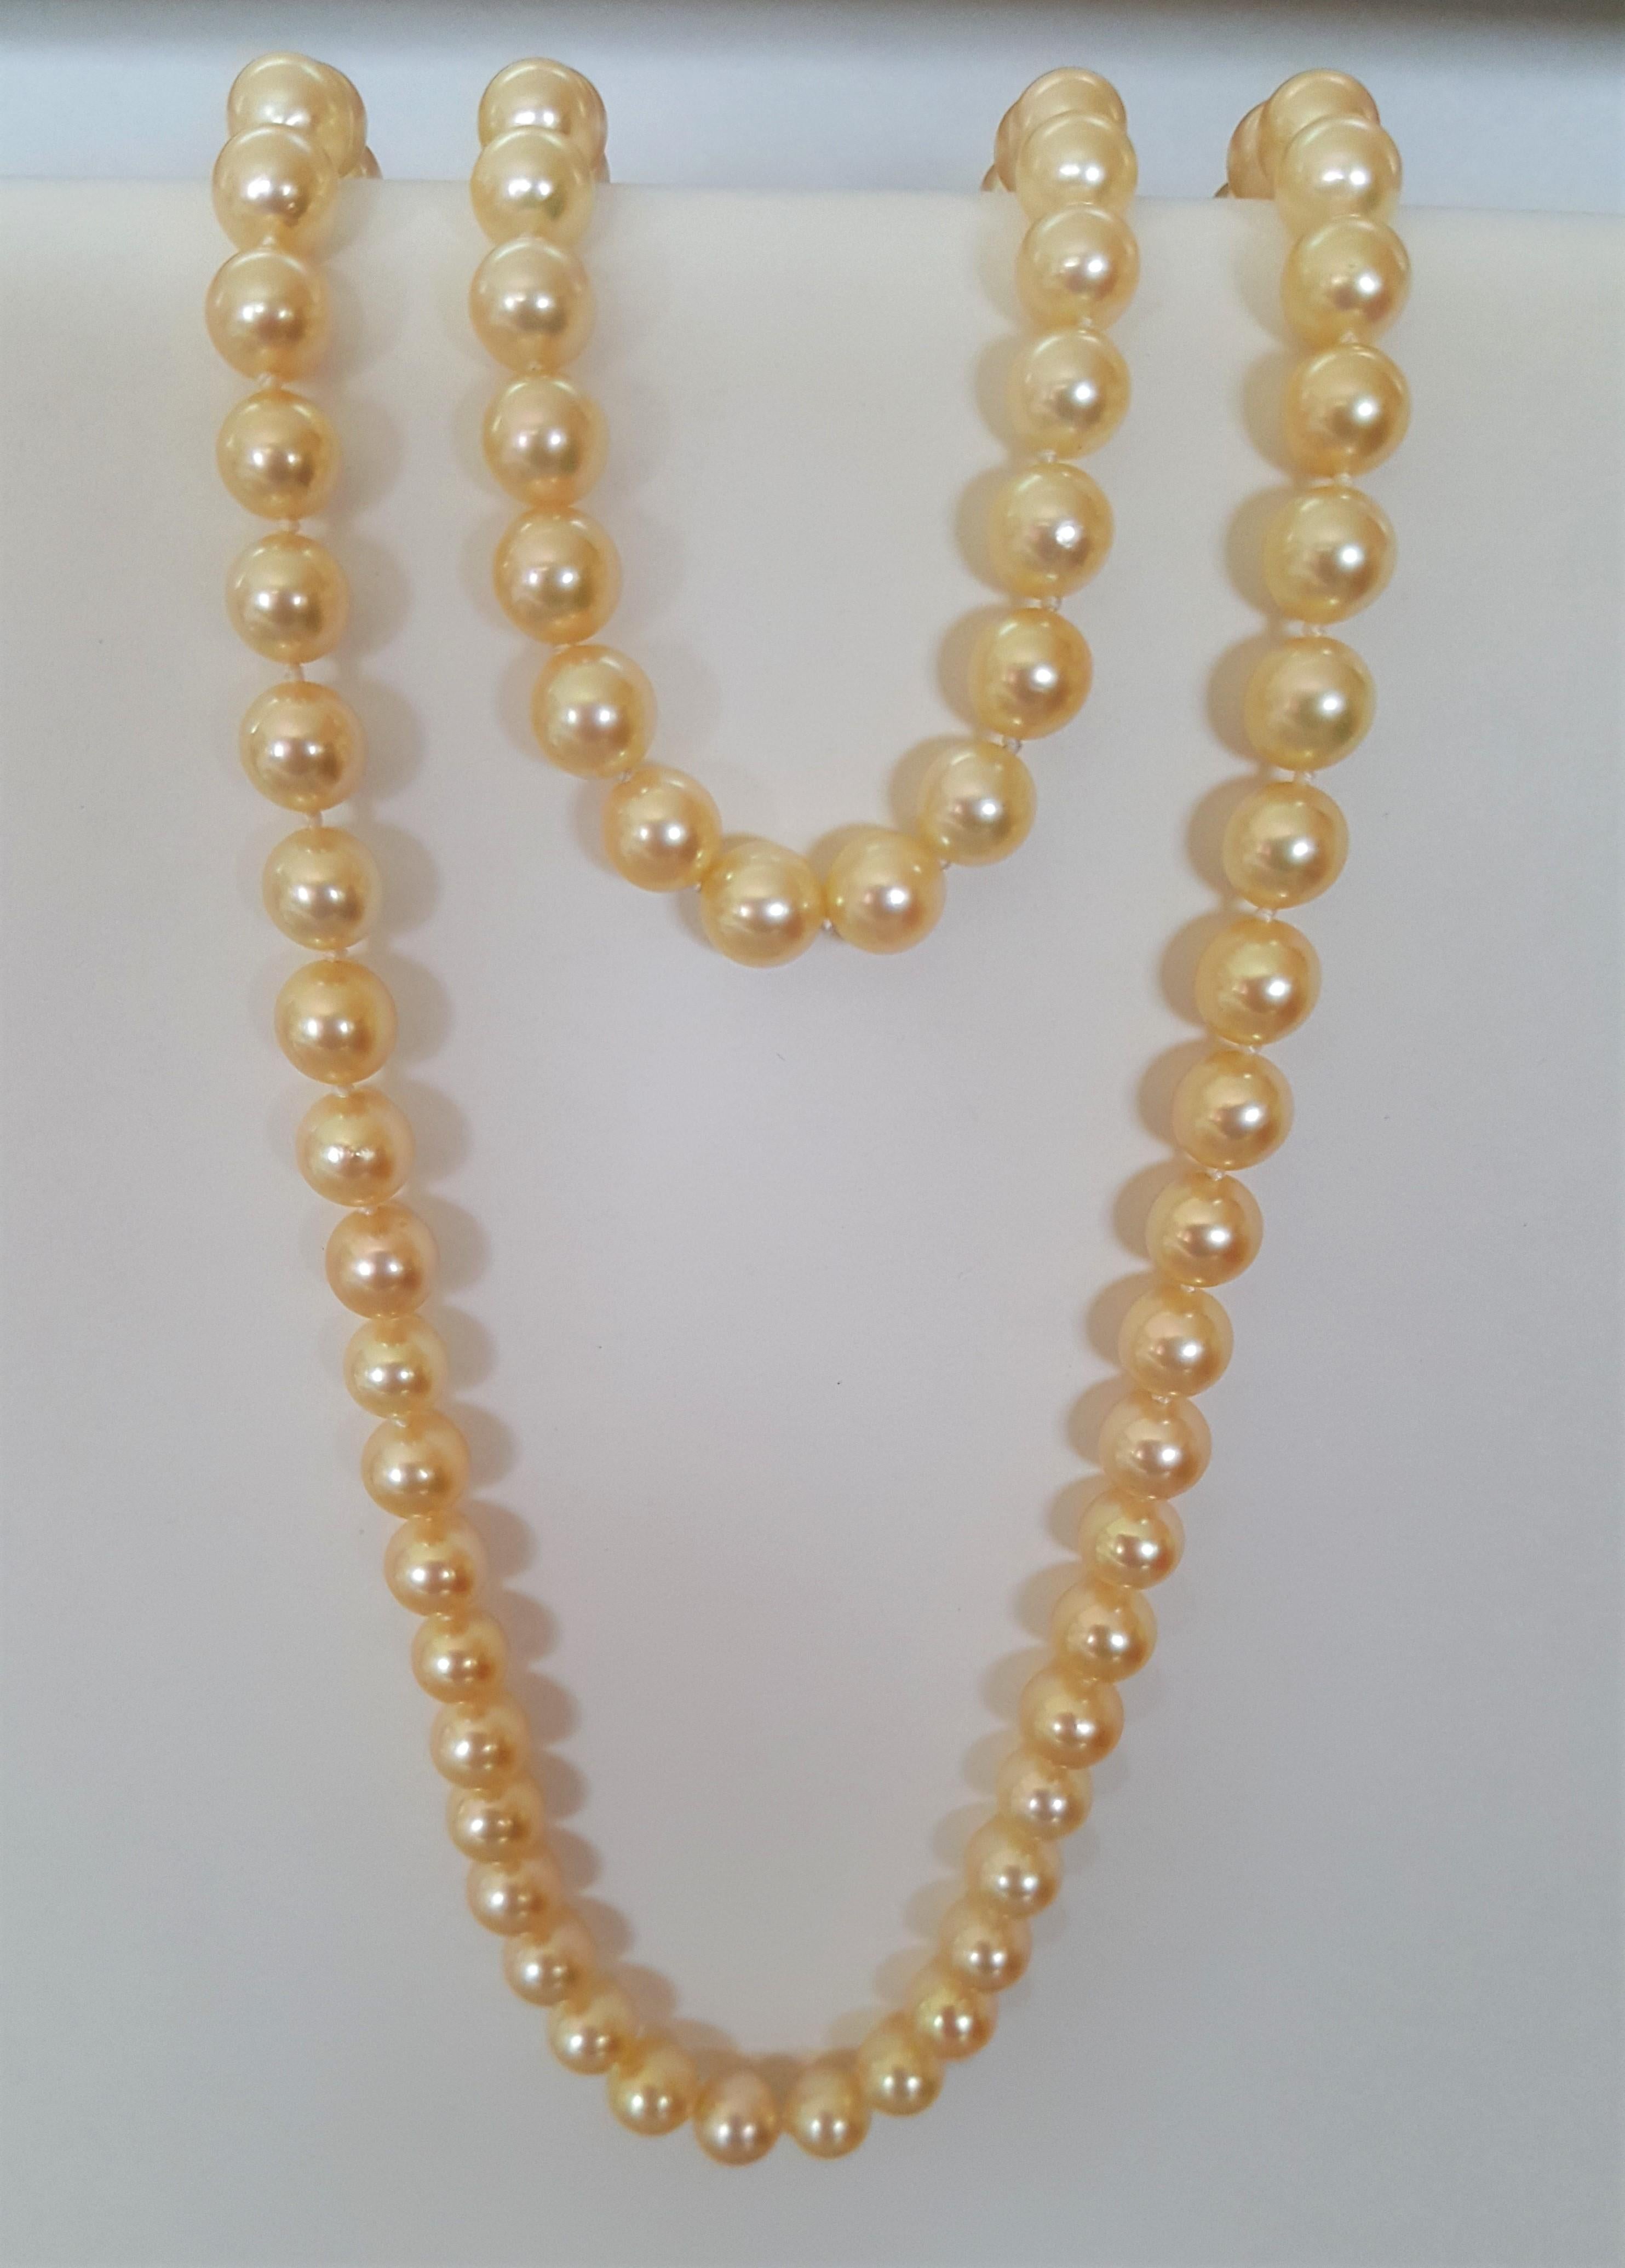 Cream Gold AAA Grade Cultured Pearl Set Necklace Bracelet 14kt, 7+mm, 27 Inches In Good Condition For Sale In Rancho Santa Fe, CA